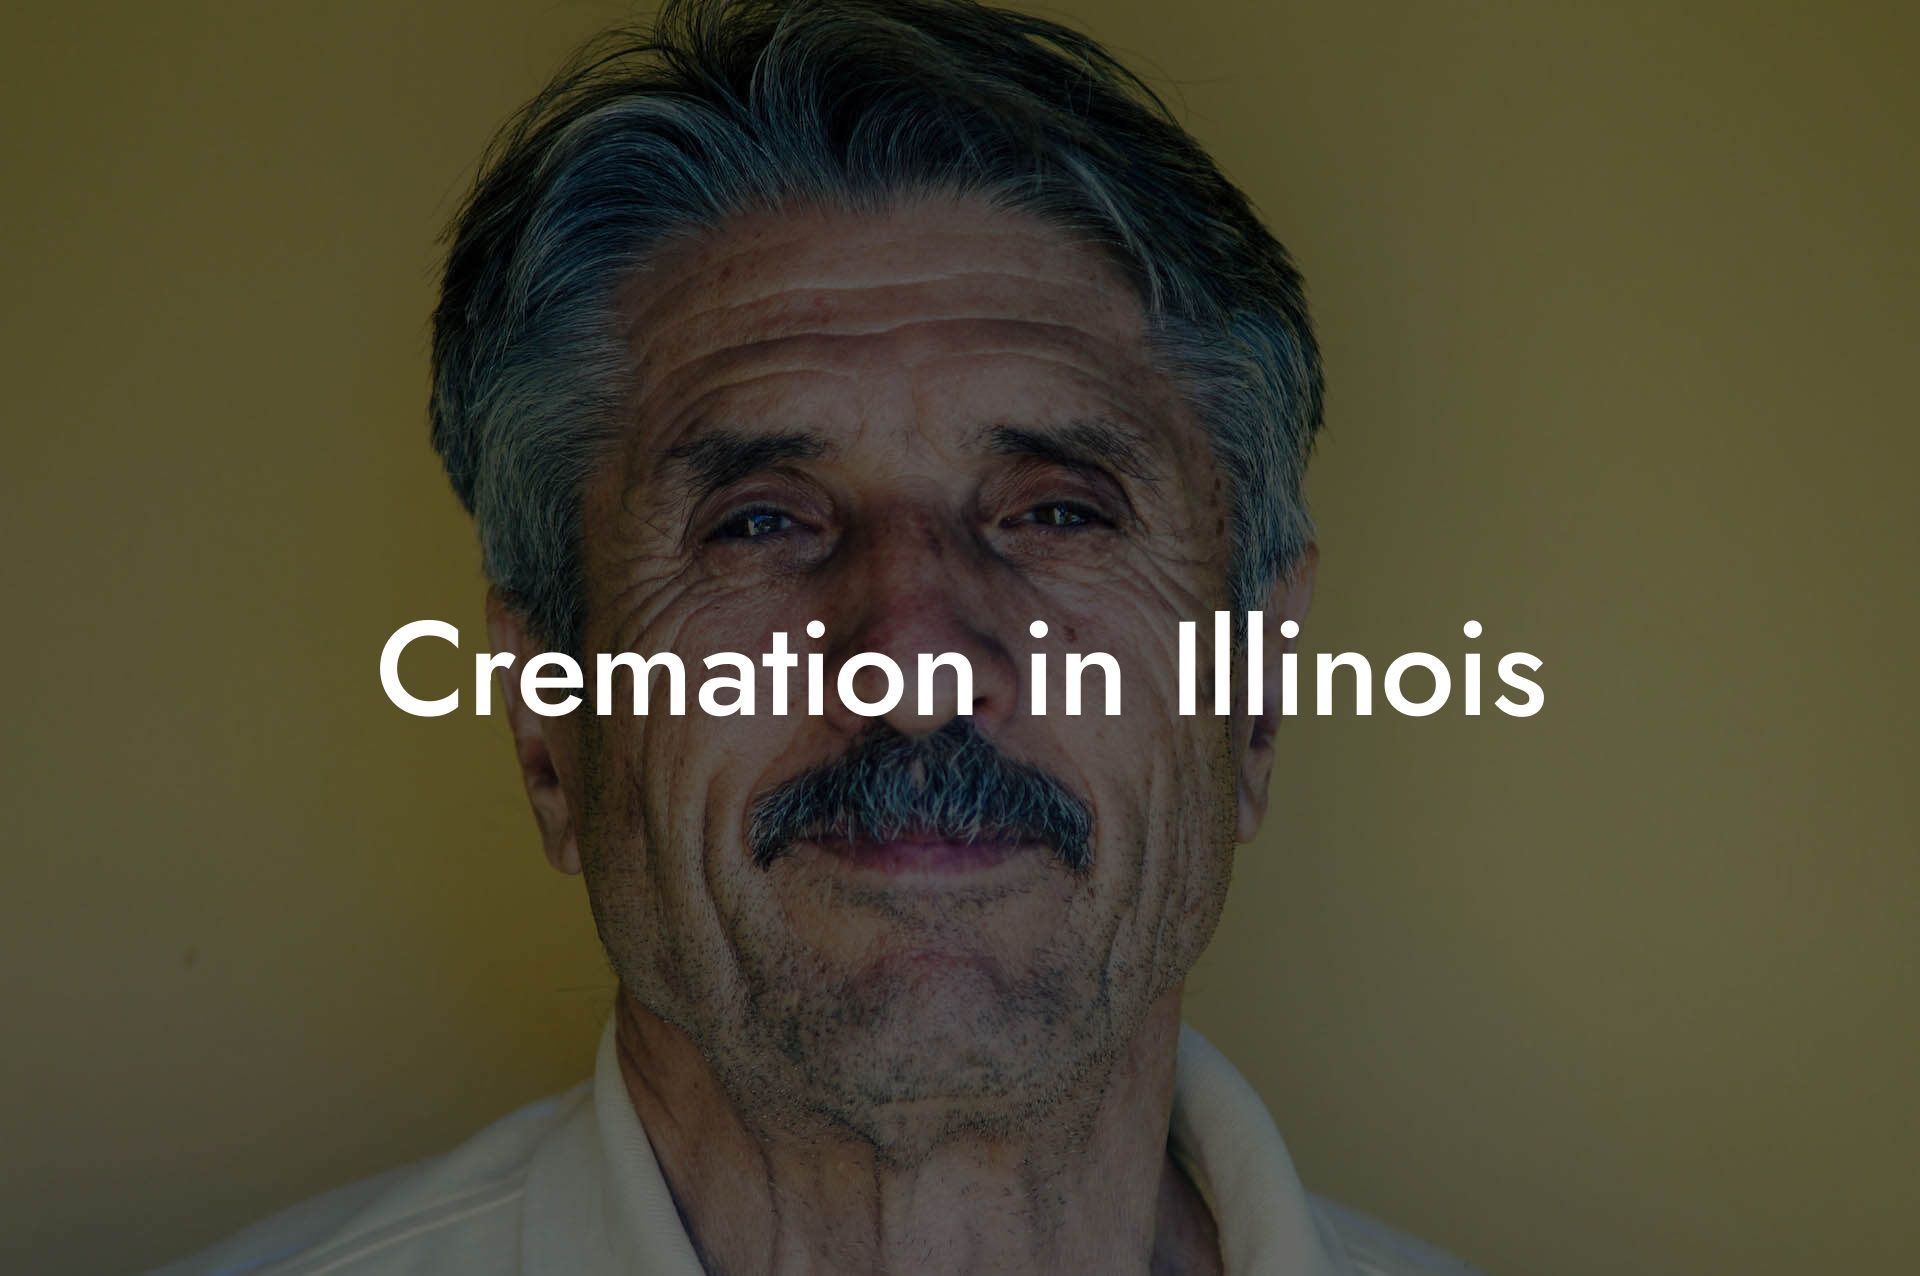 Cremation in Illinois